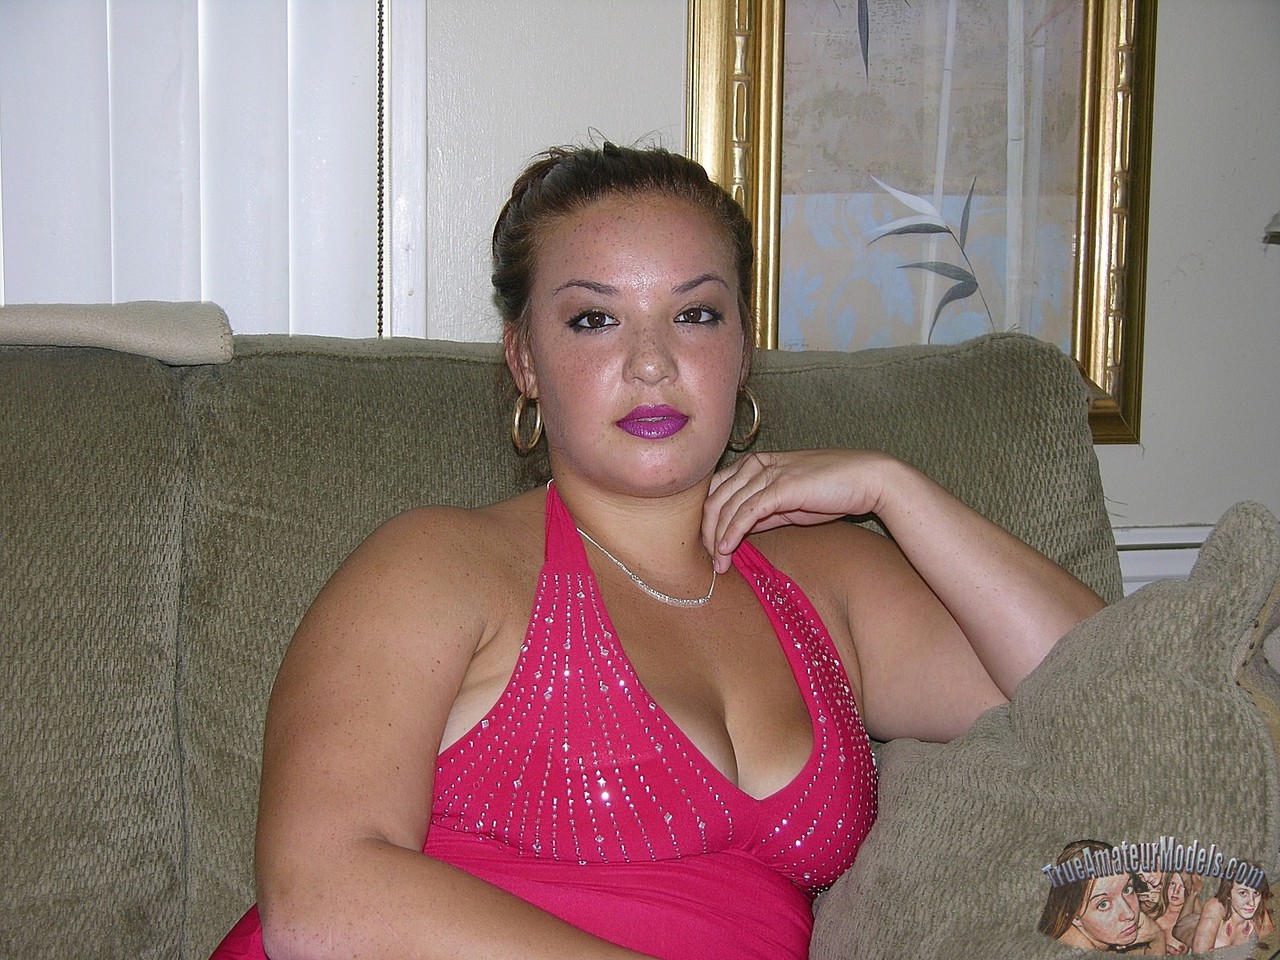 Amateur BBW Brittany K slips off her red dress to model totally naked at home pic